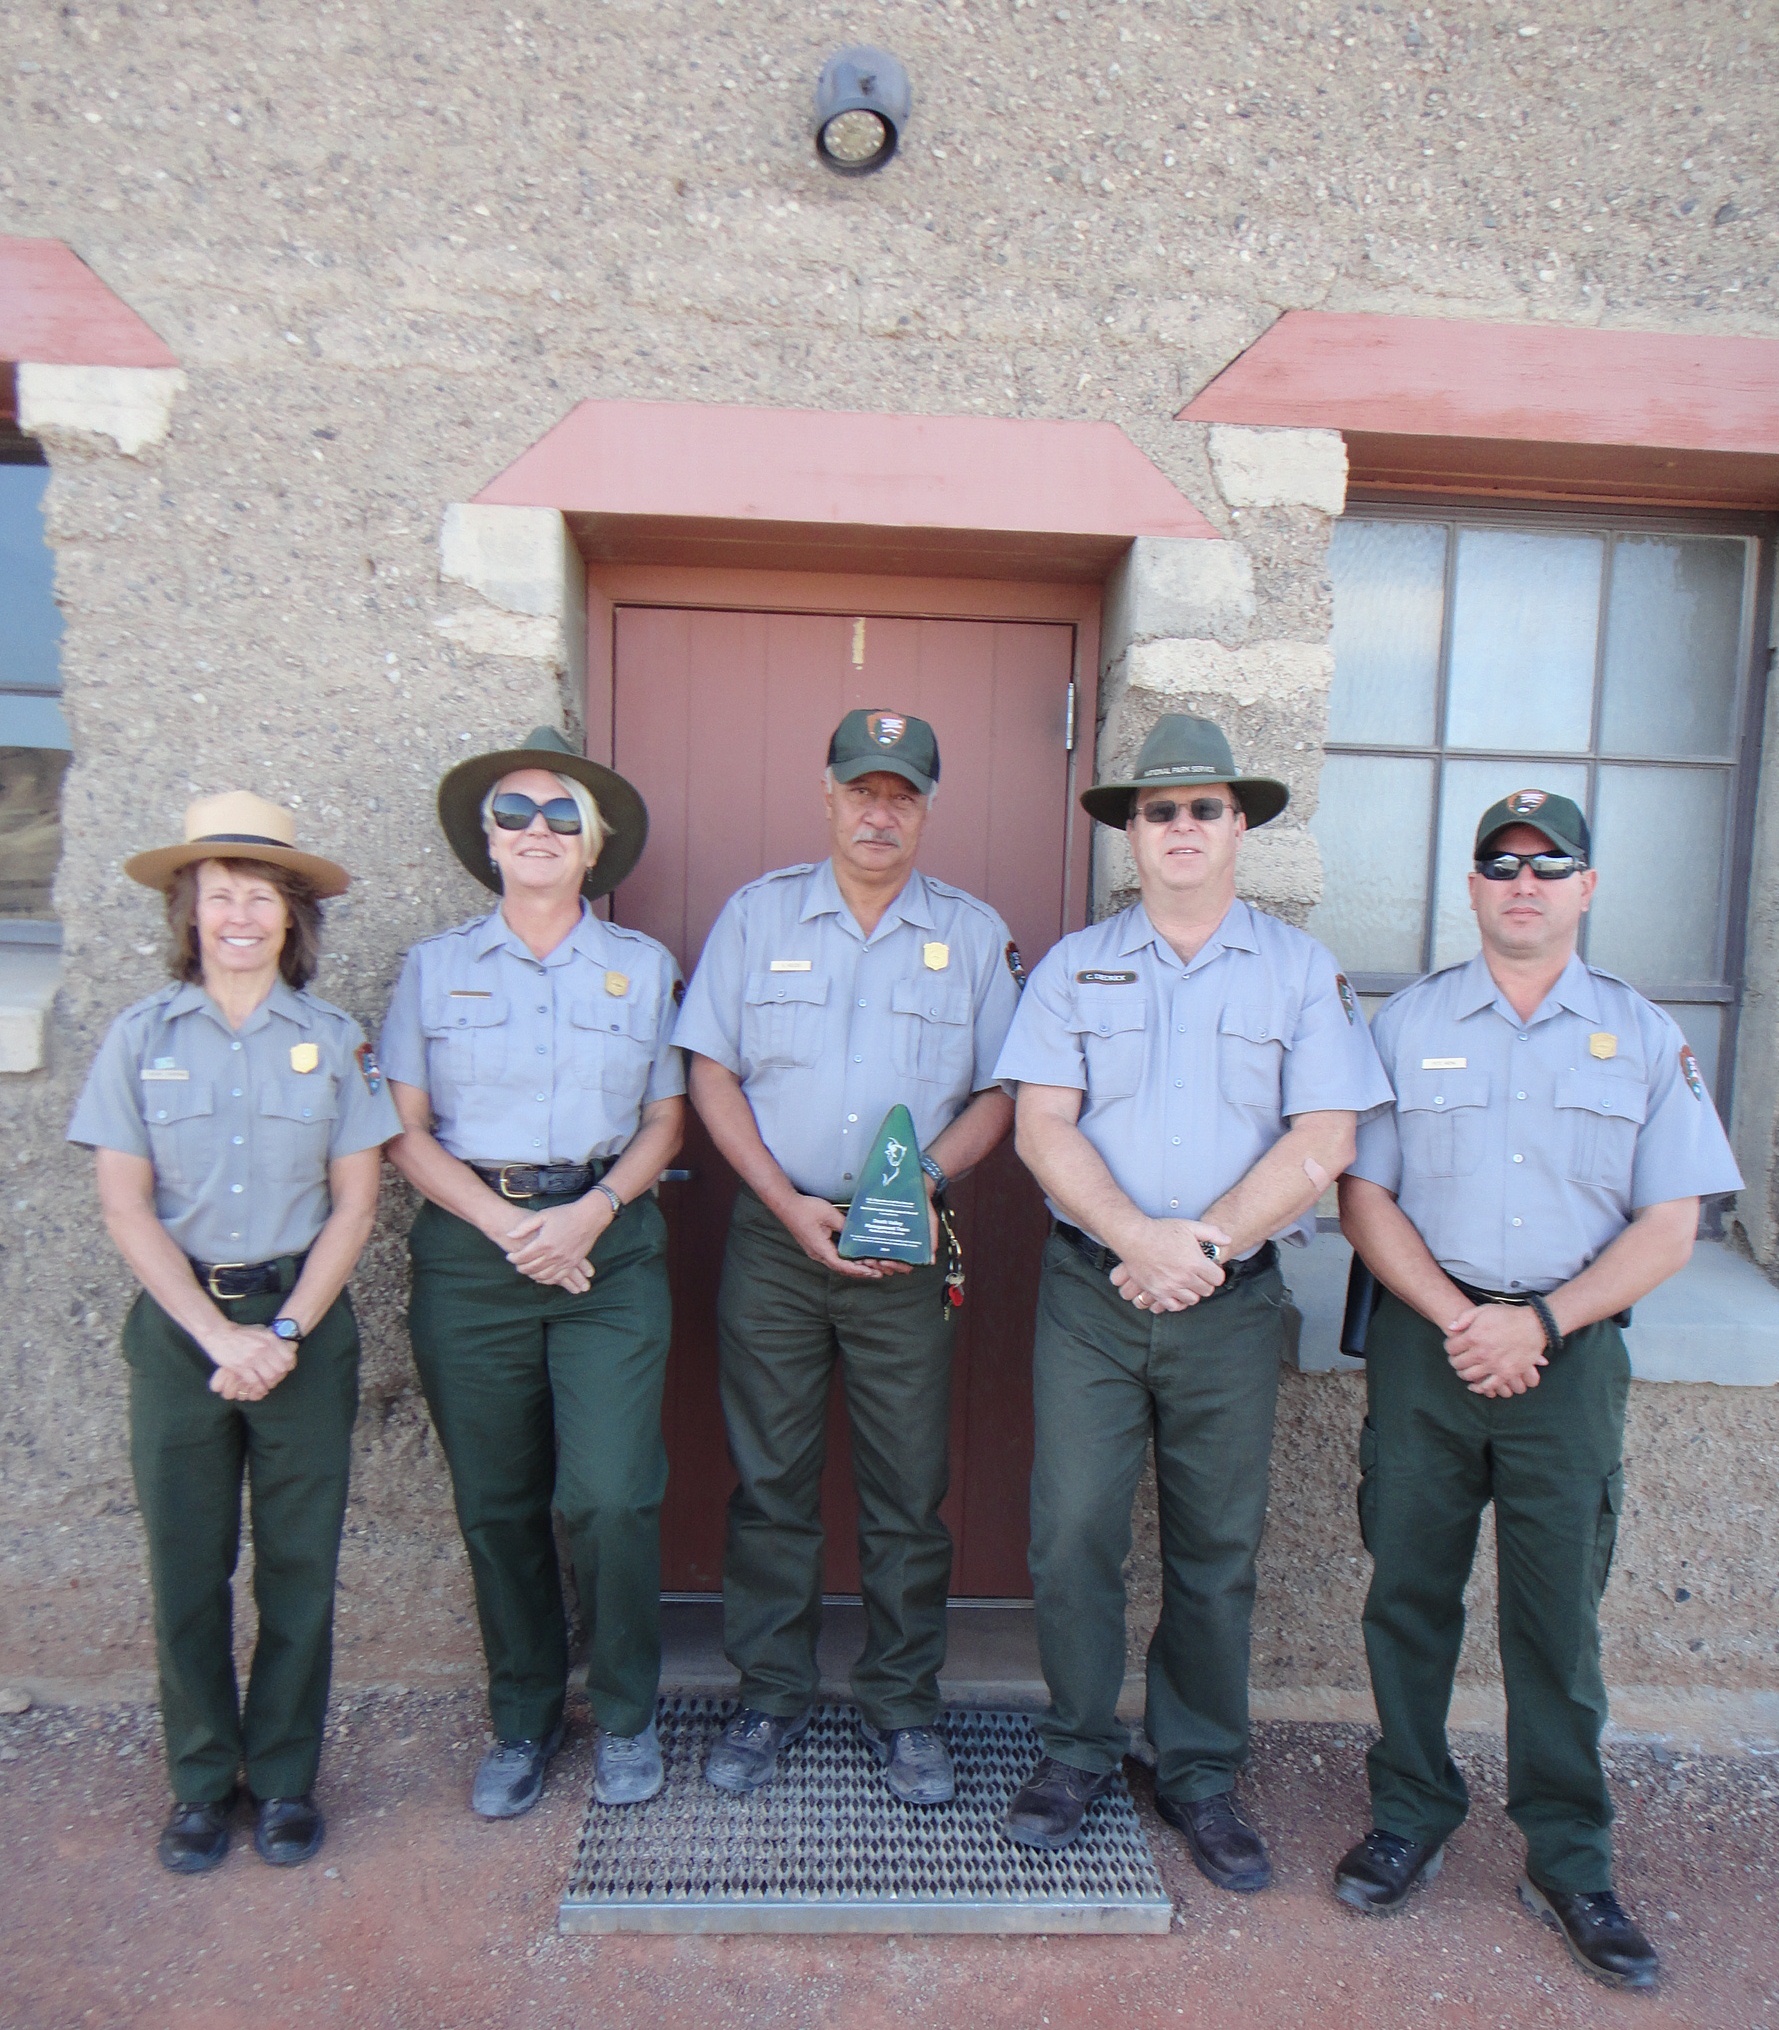 Death Valley NP’s Building and Facility staff and Management Team who will maintain the infrastructure that is required to preserve the park’s International Dark Sky Park “Gold Tier” status.